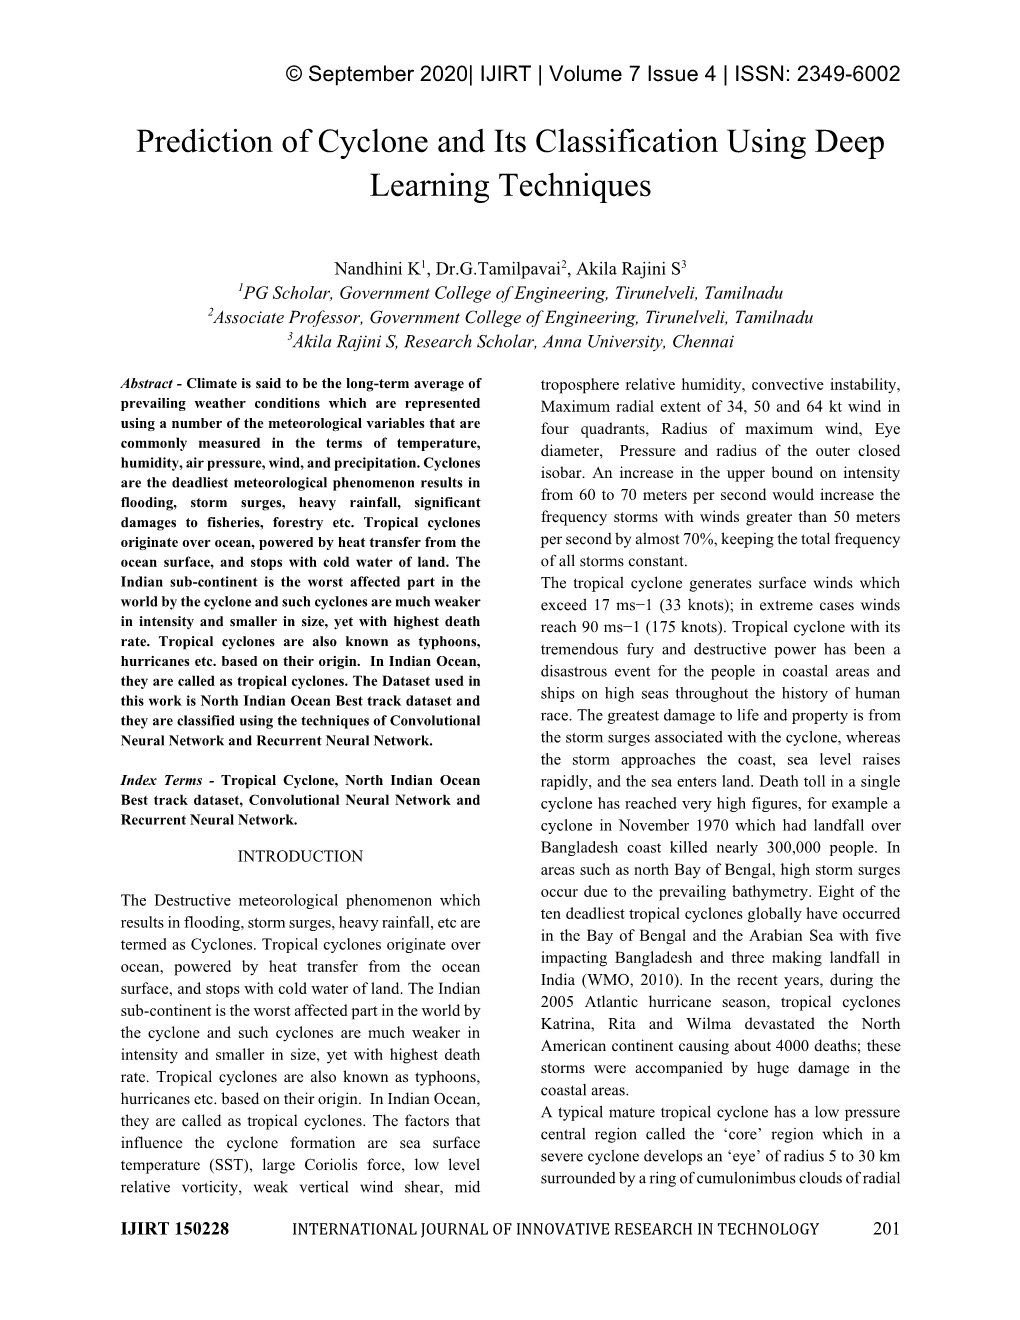 Prediction of Cyclone and Its Classification Using Deep Learning